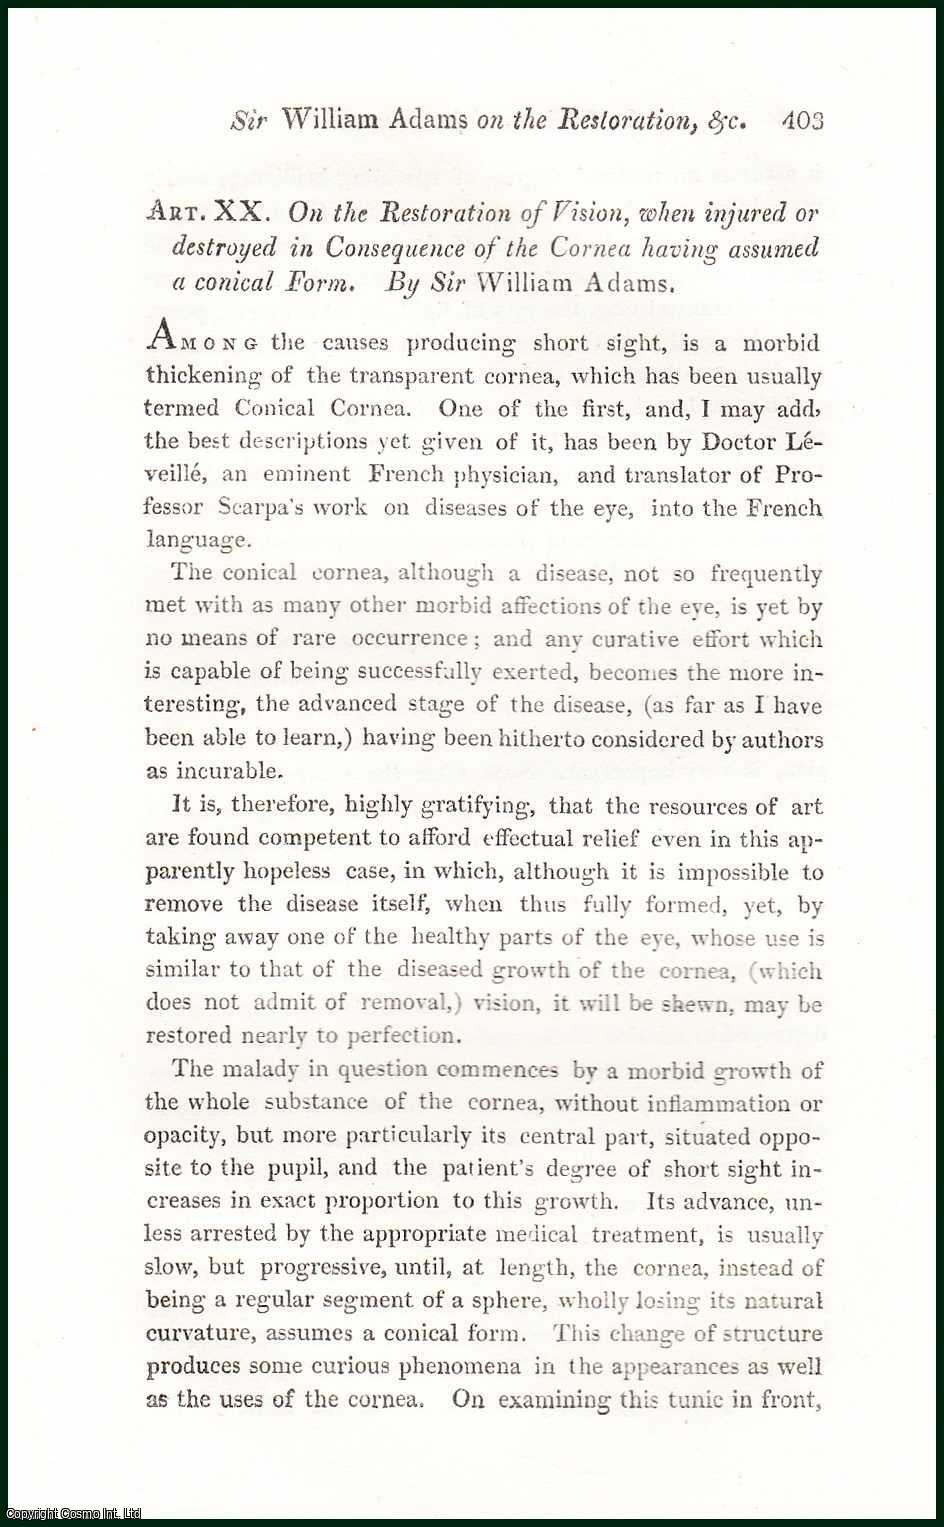 Sir William Adams - On The Restoration of Vision, when injured or destroyed in Consequence of the Cornea having assumed a conical Form. An uncommon original article from the Journal of Science and the Arts, 1817.